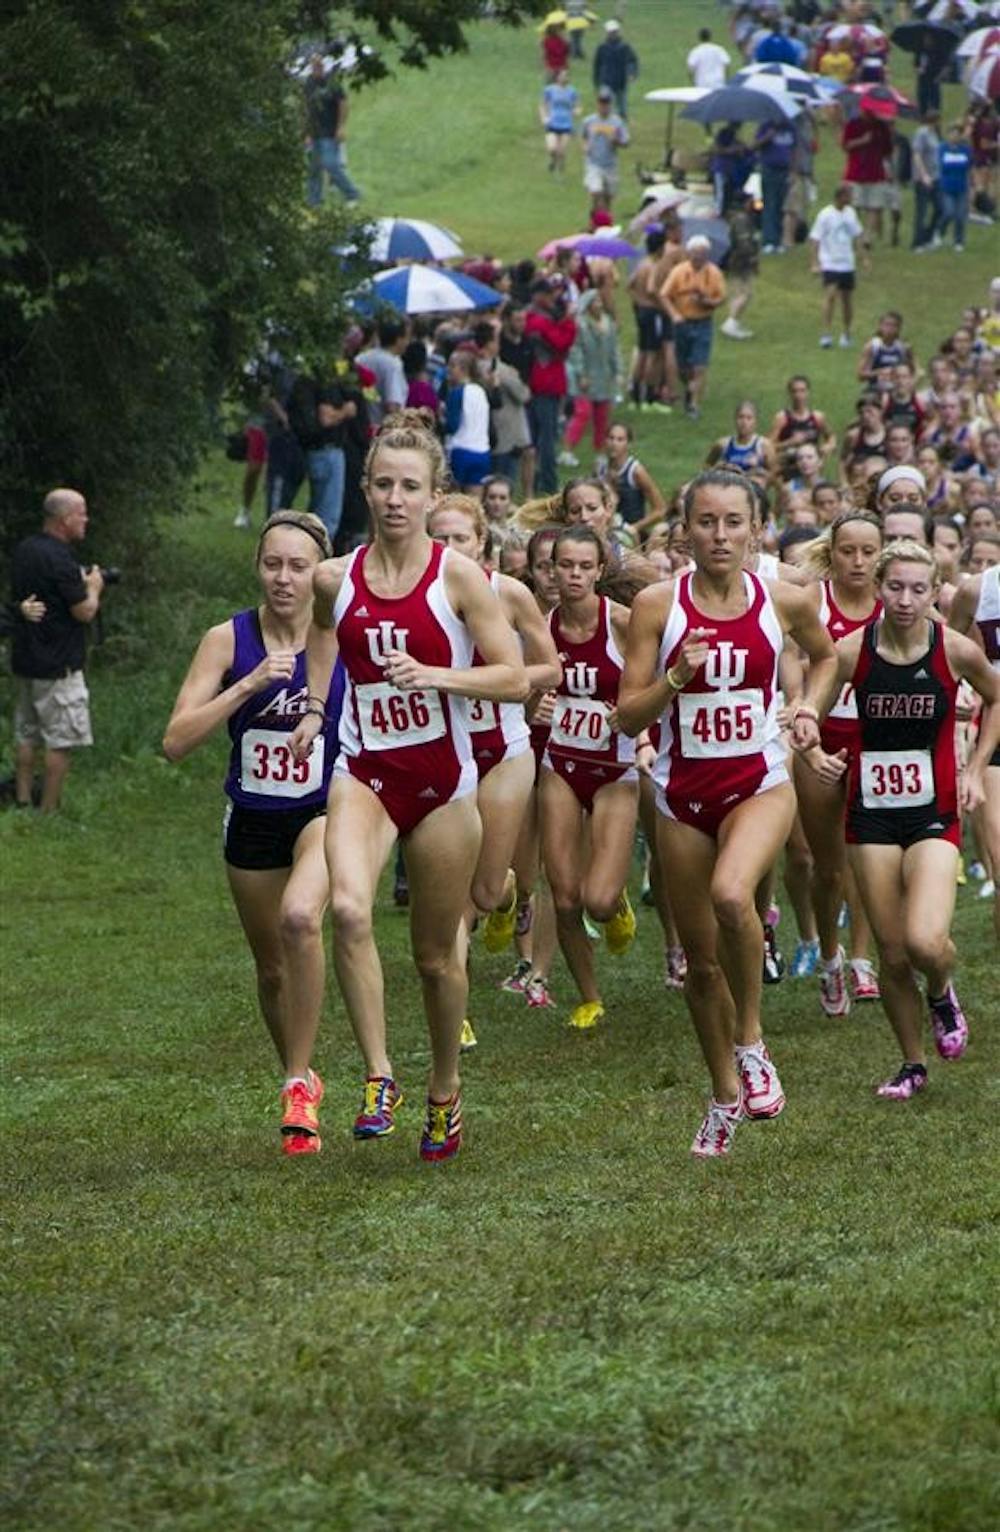 Samantha Ginther and Kelsey Duerksen lead the women's race Friday afternoon at the IU Cross Country Course. Indiana University hosted the Indiana Intercollegiate meet, where teams from other Indiana colleges could compete. 